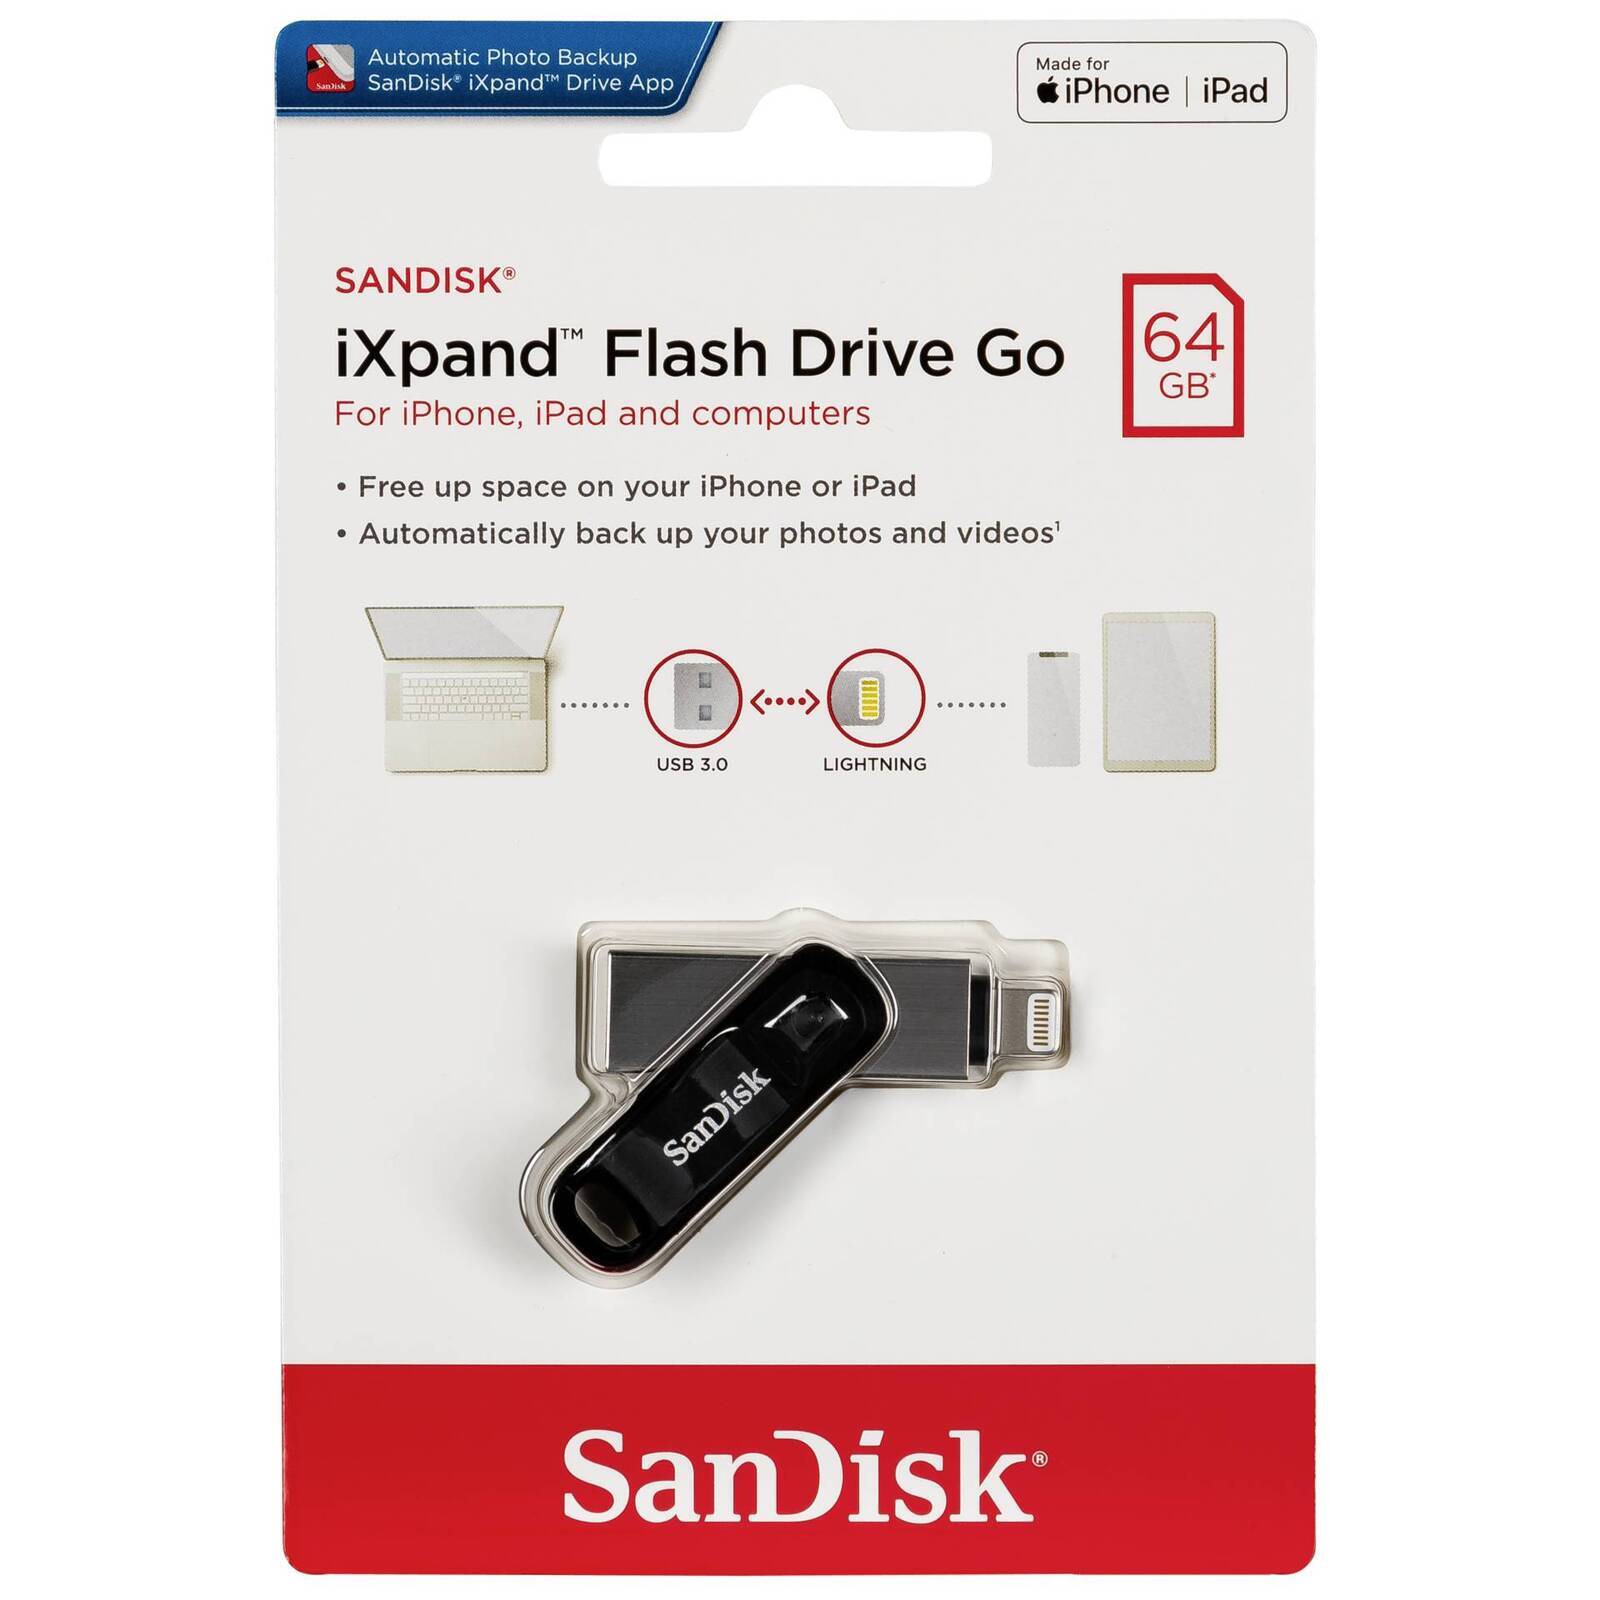 SanDisk 64GB iXpand USB3.0 Flash Drive Go with Lightning Connector